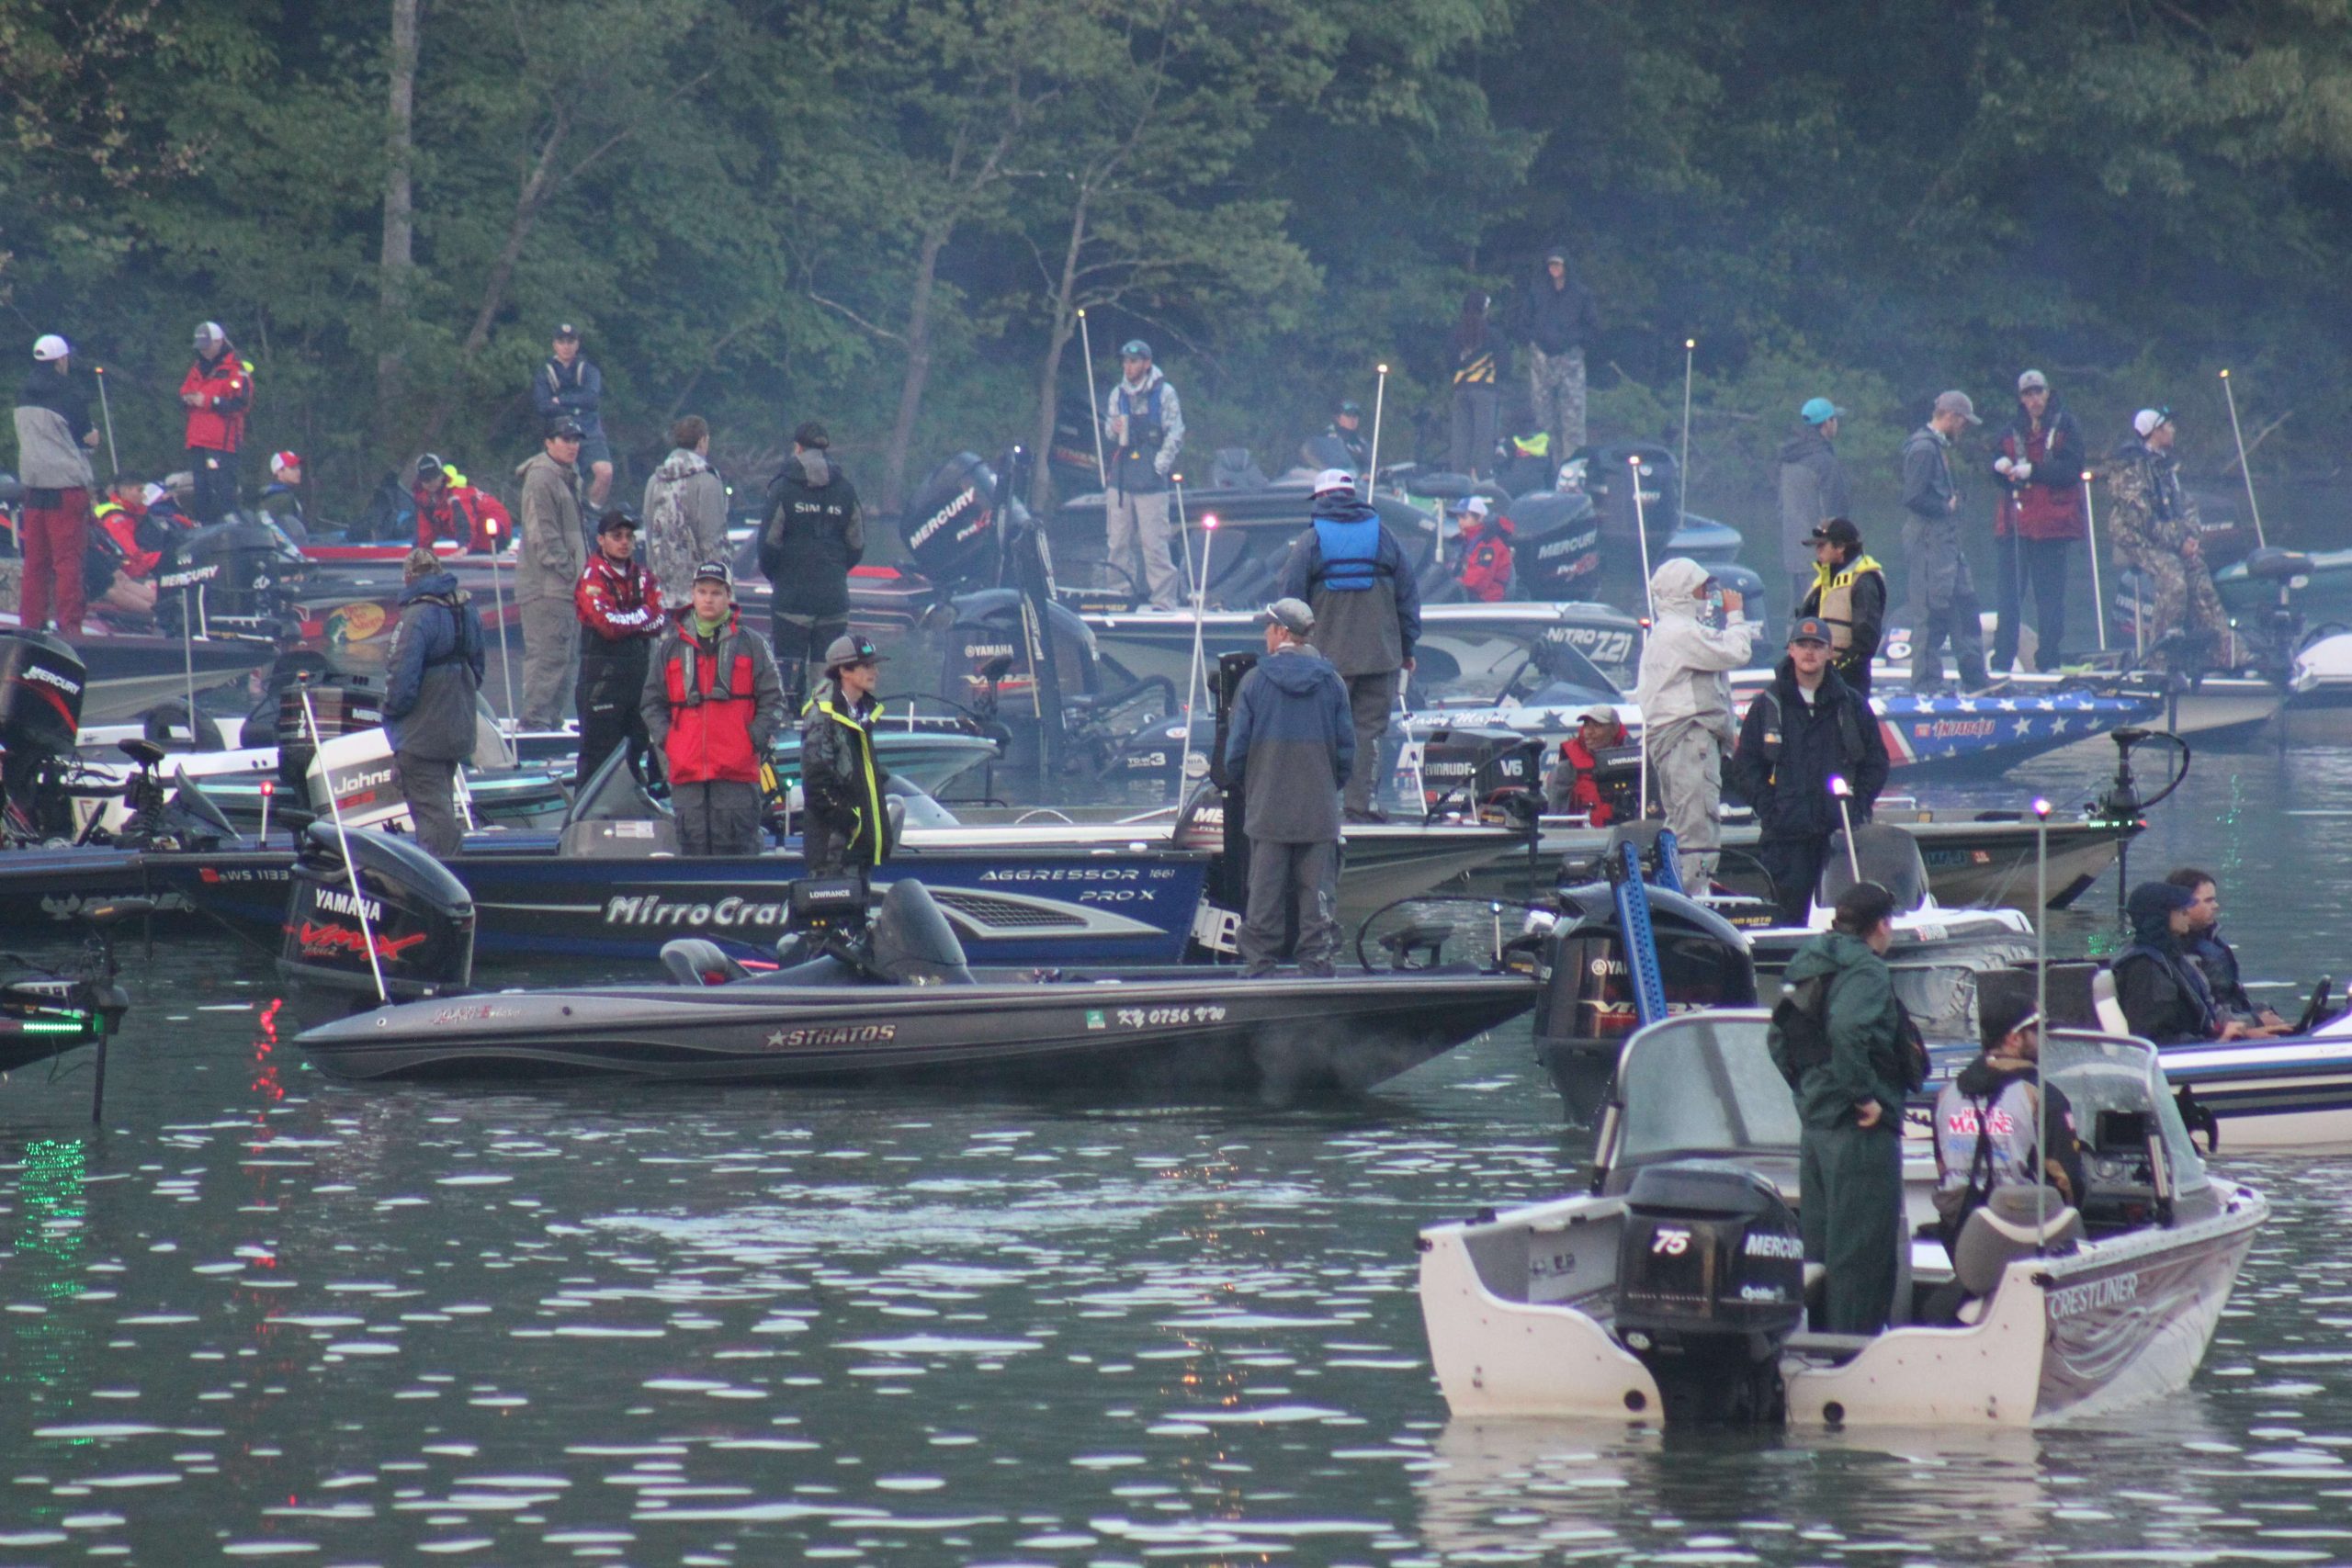 Be sure you catch all the action right here on Bassmaster.com where weâll have live streaming video of the weigh-in, results, photographs, stories and much more about this and every other B.A.S.S. tournament you could want!